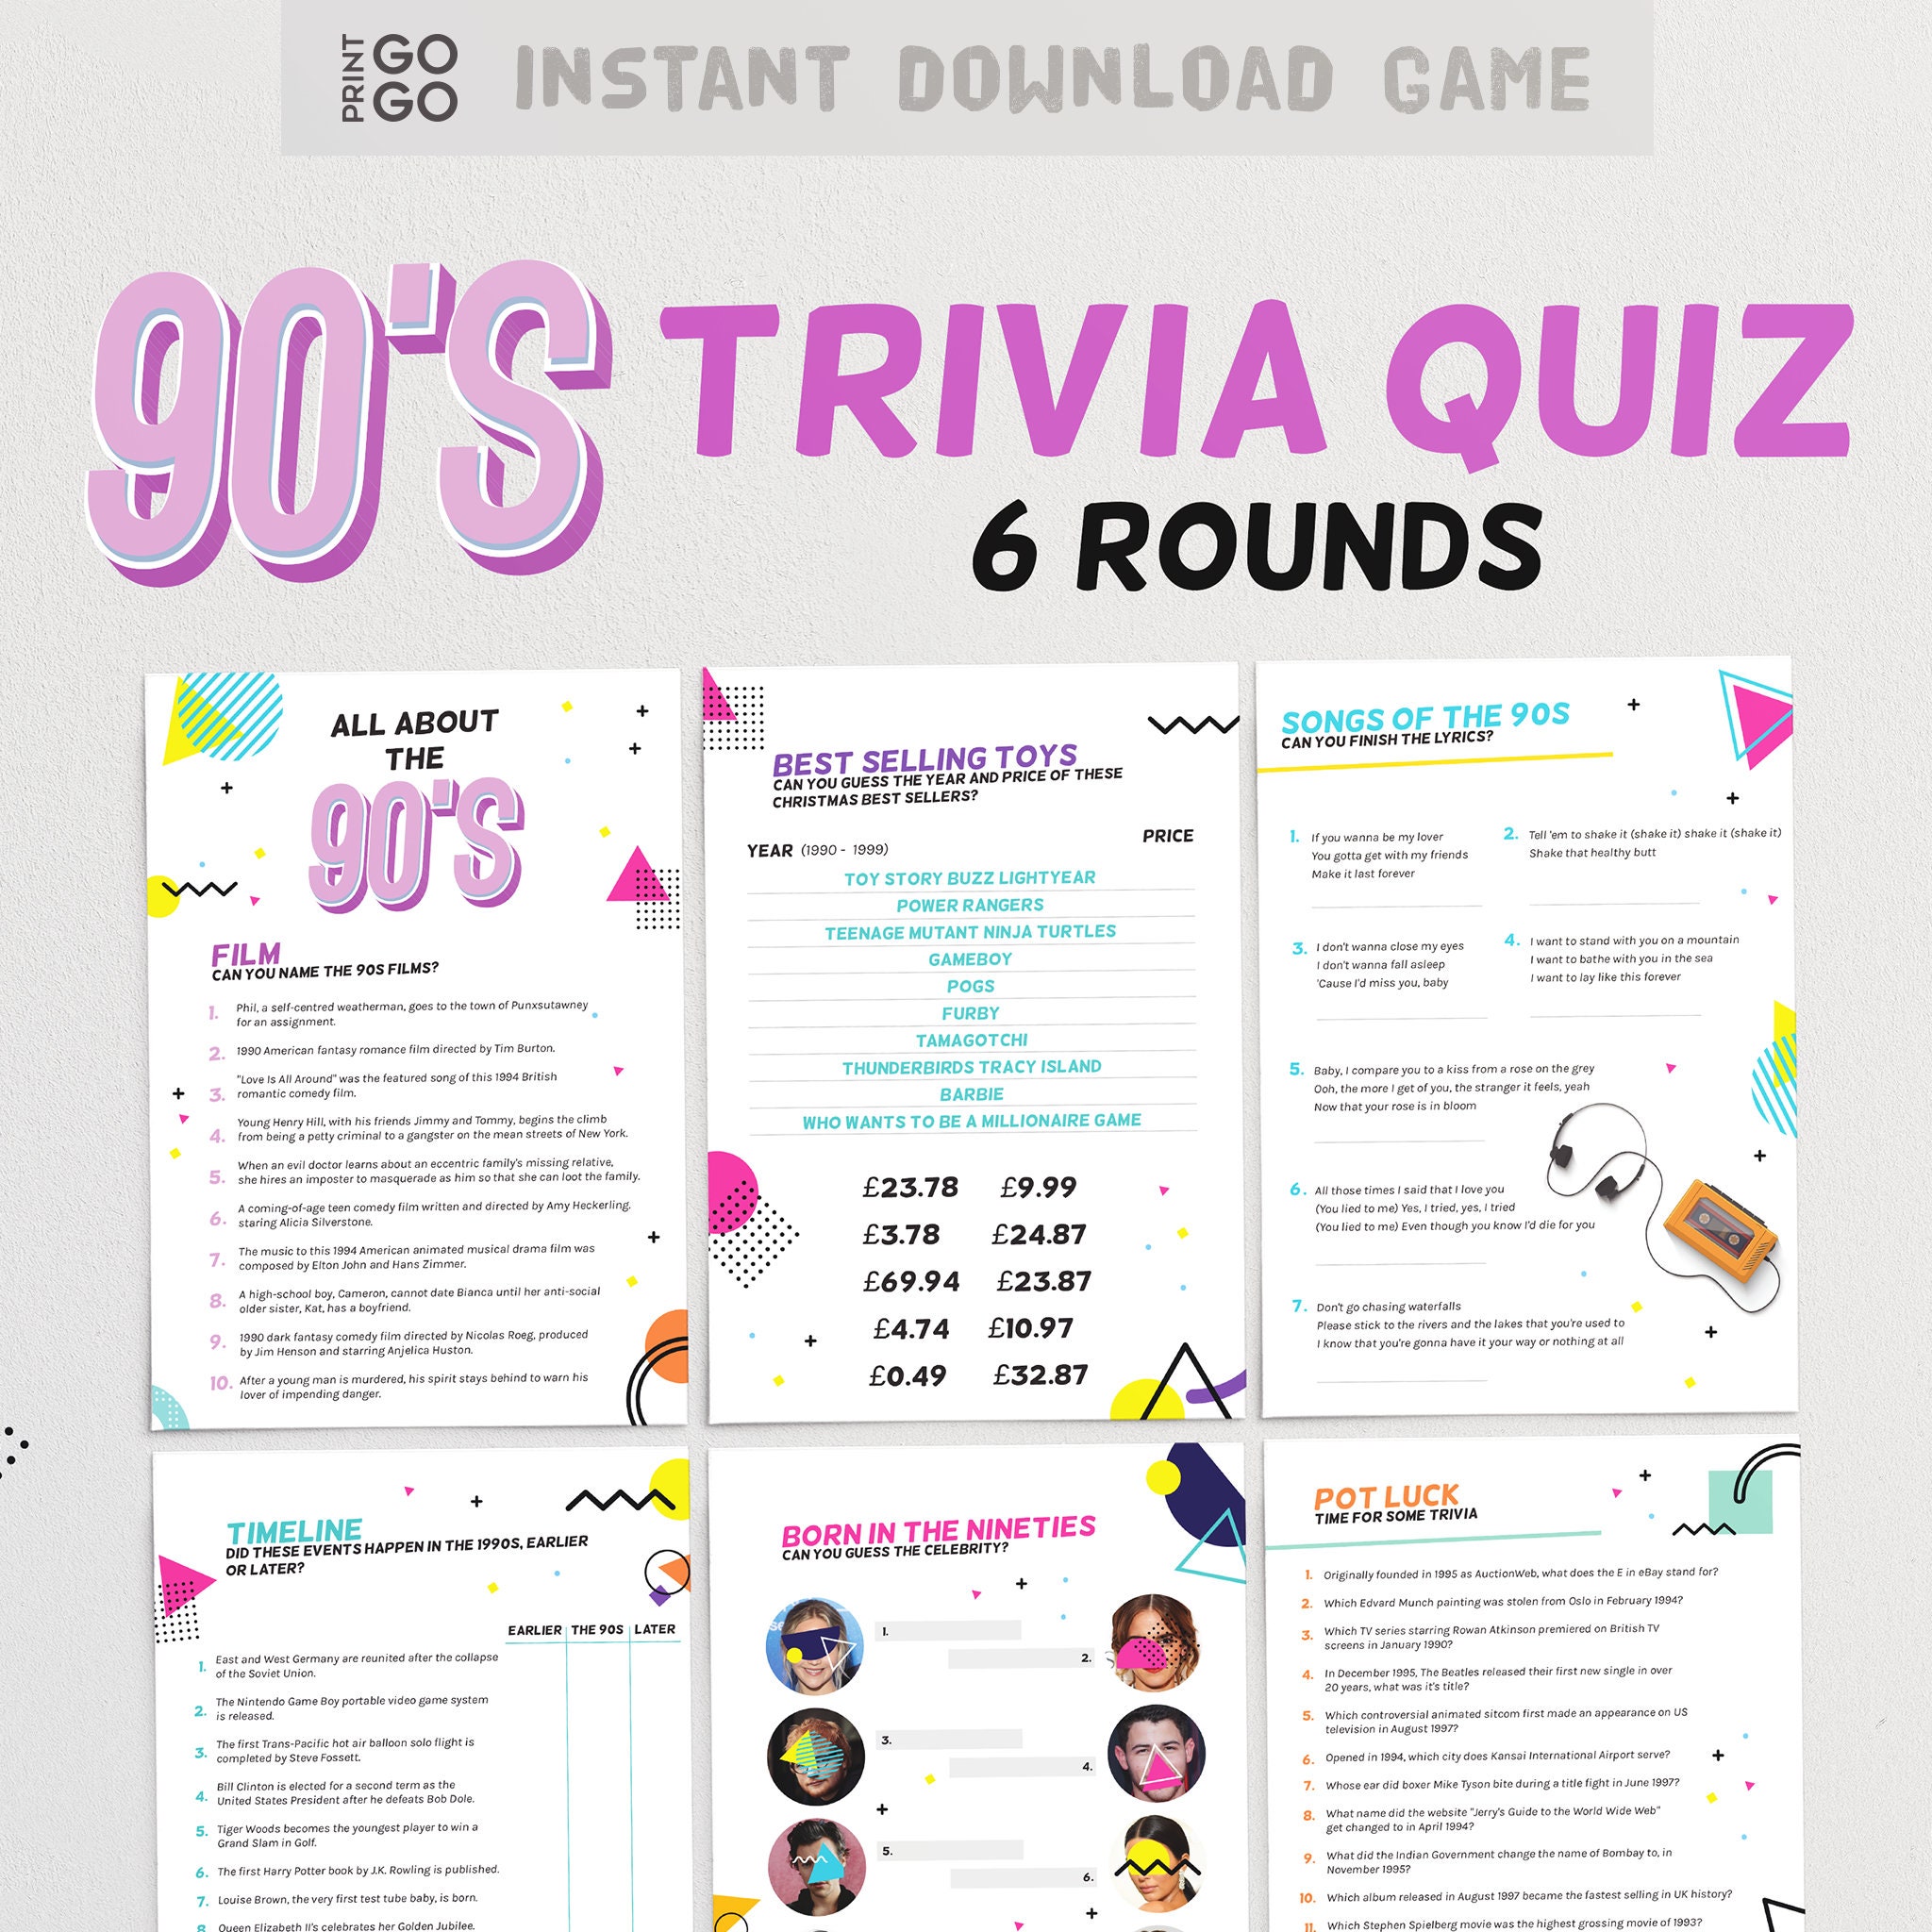 57 History Trivia Questions For Your Home Pub Quiz